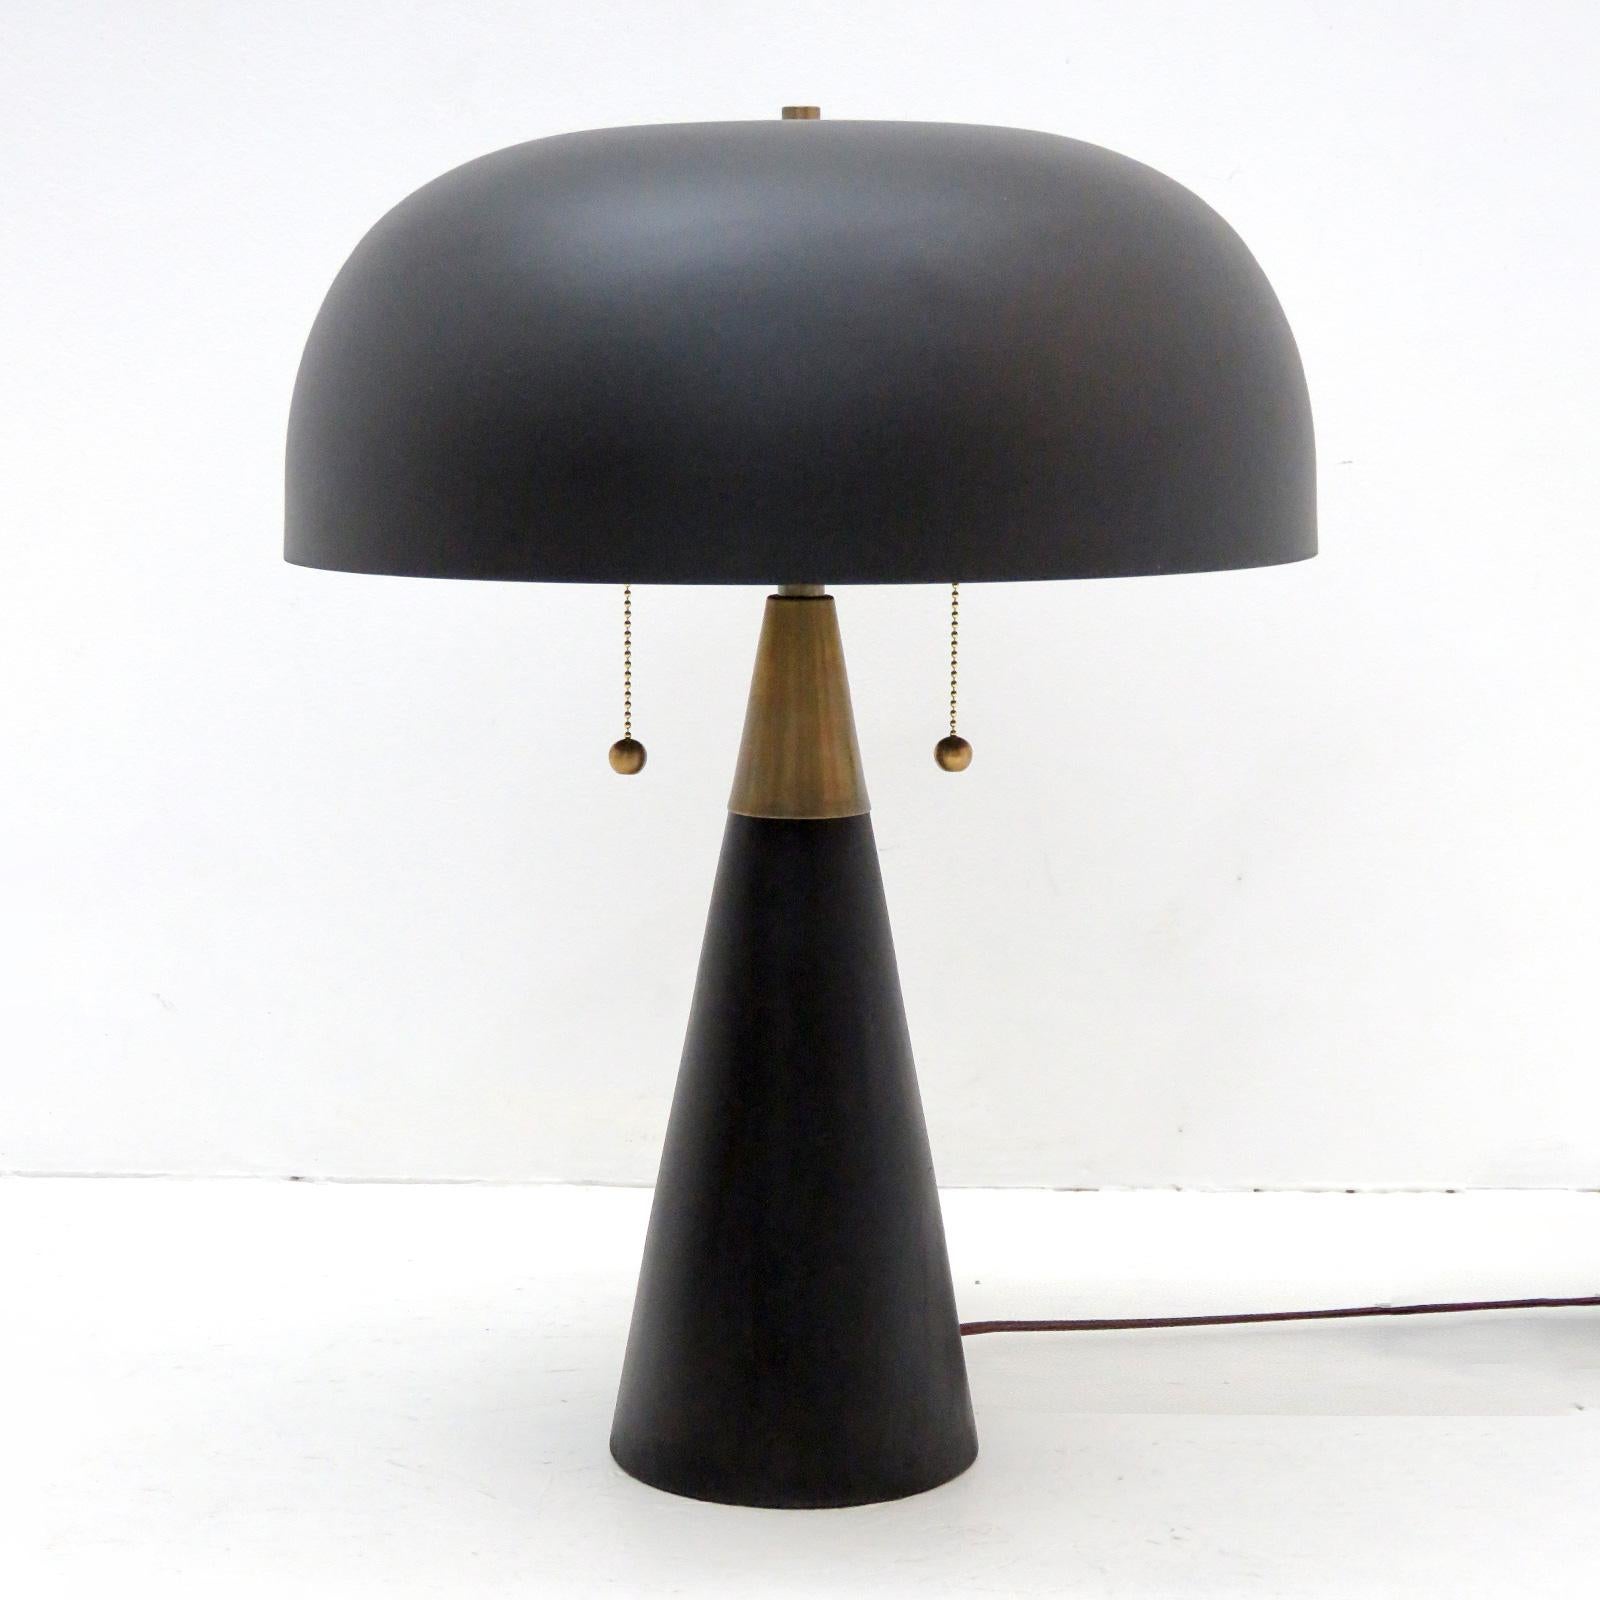 Wonderful organic modern table lamps by Alvaro Benitez for Gallery L7, with a blackened wood base, a large black powder-coated metal shade and brass hardware. Dual bulb setup with two individual pull switches and a general in-line on/off switch.